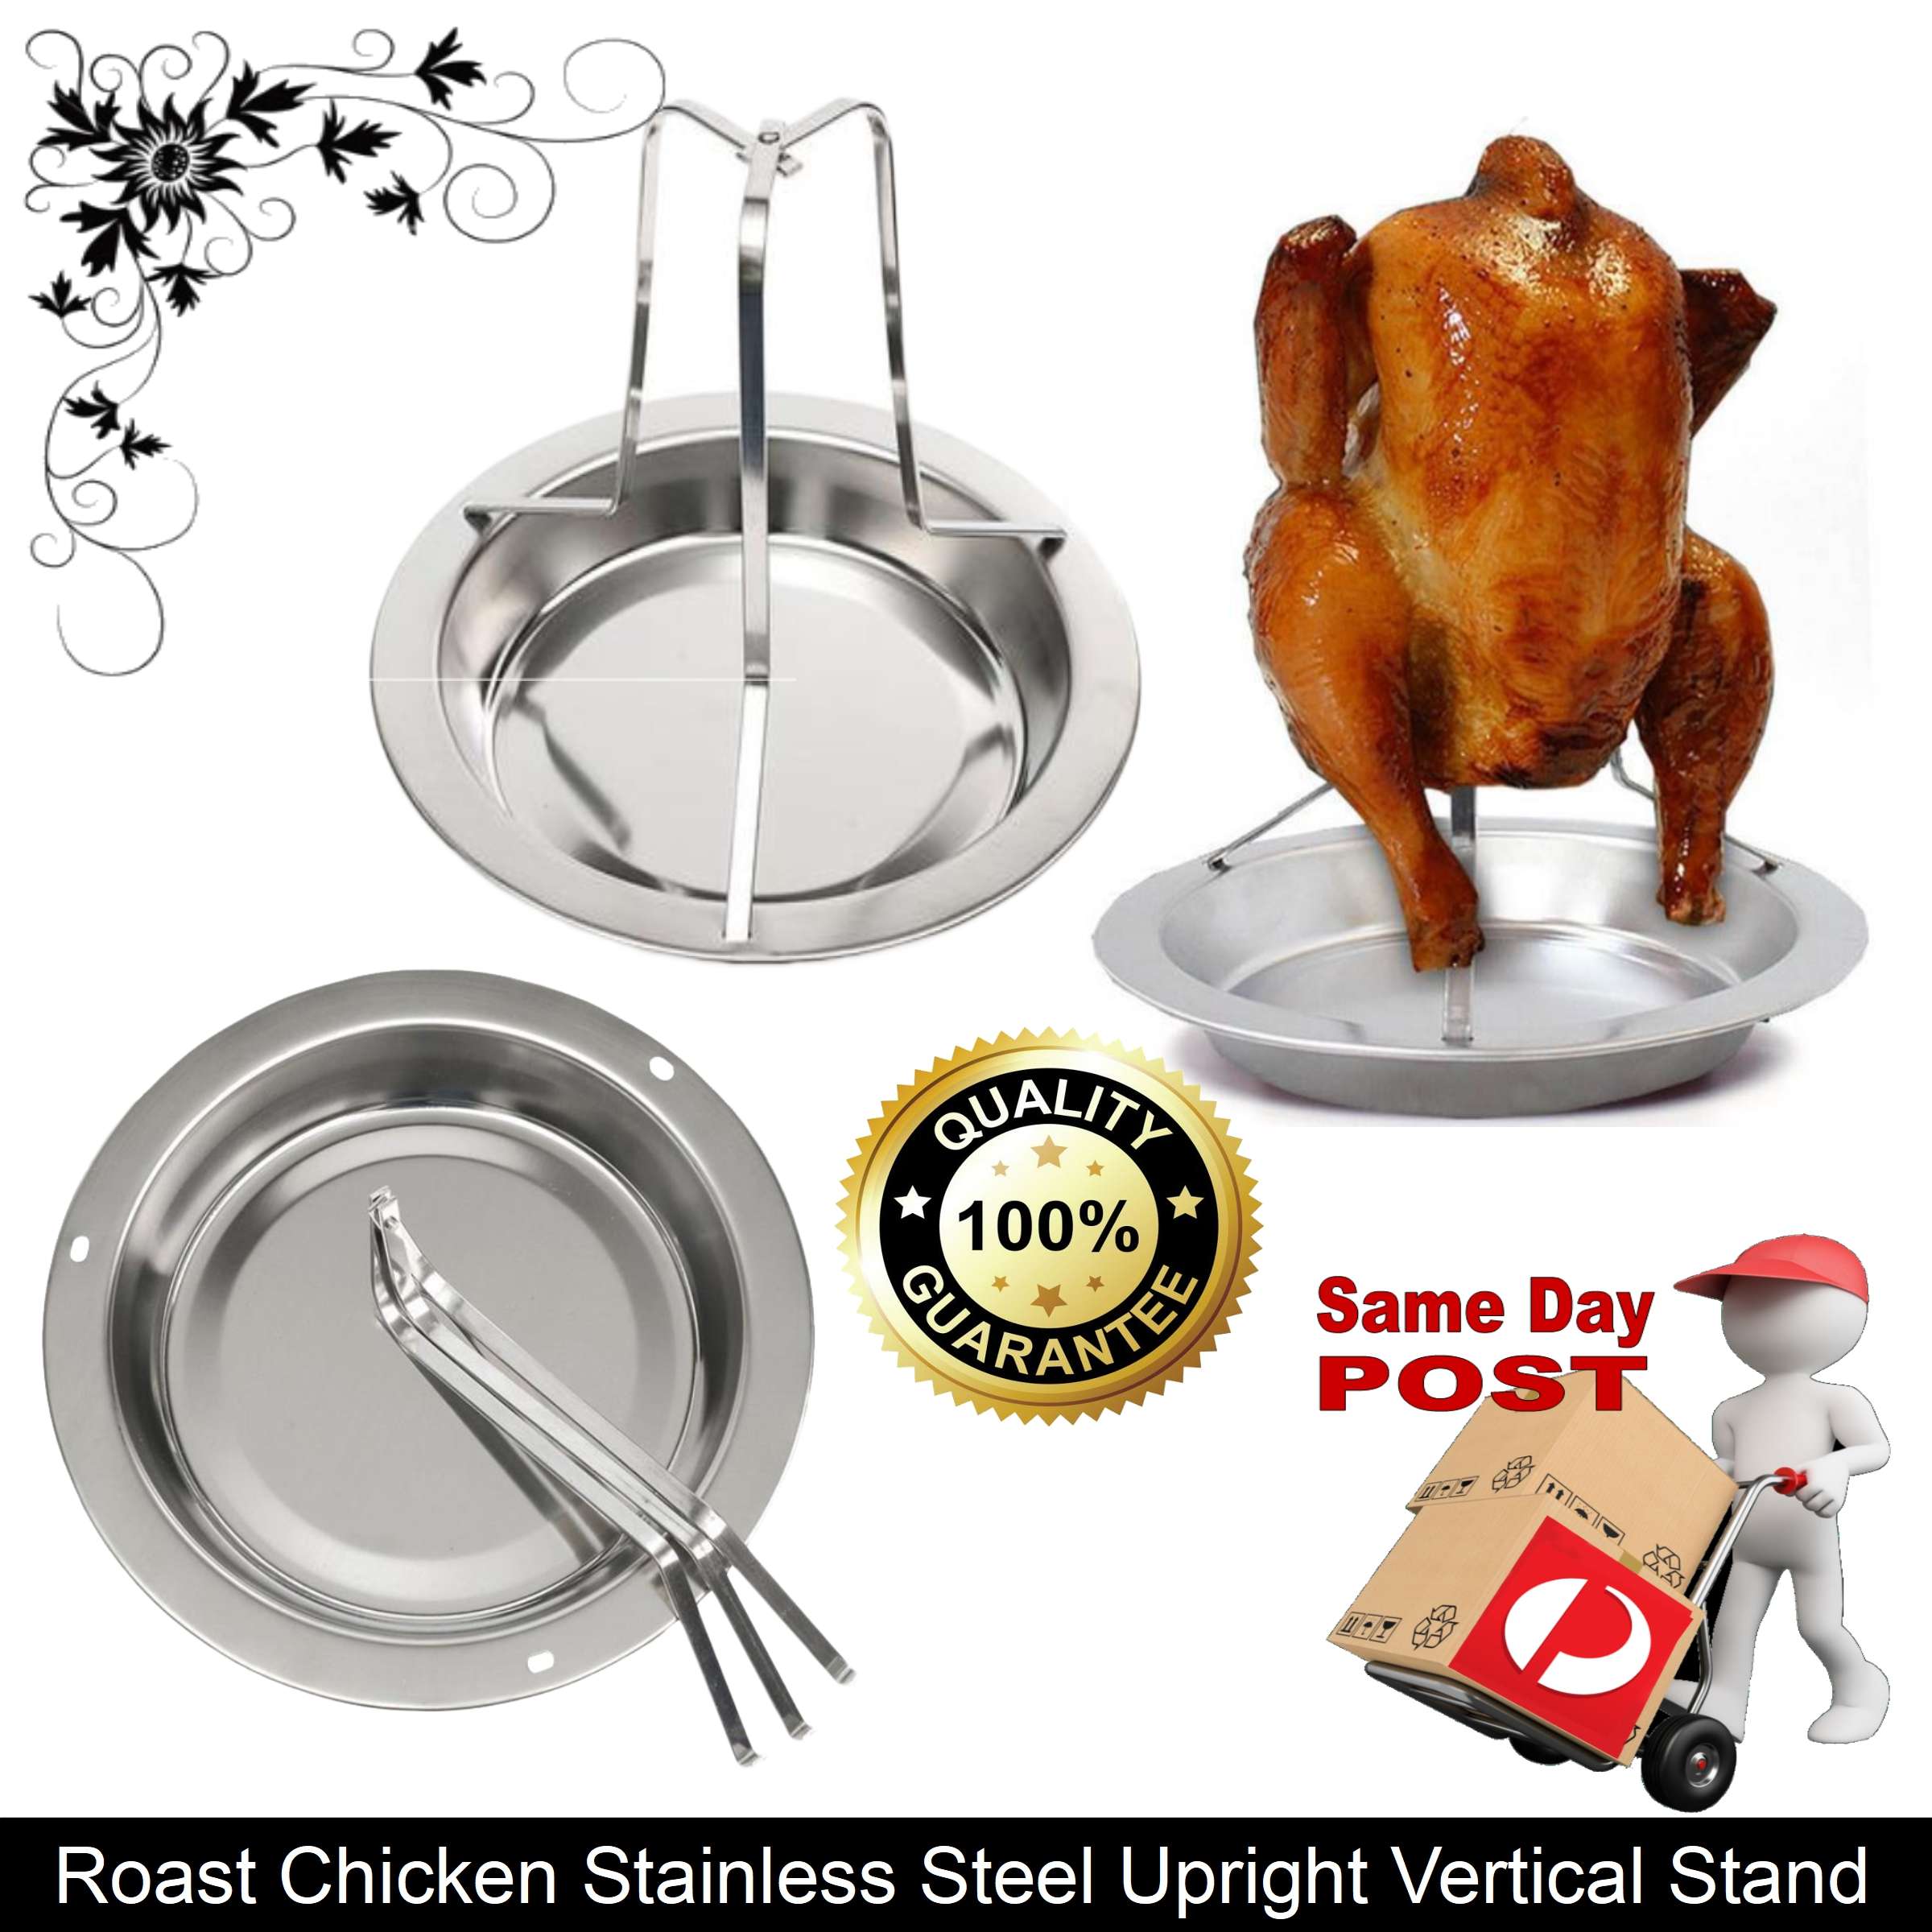 Dishwasher Safe Chicken Duck Grill Holder Beer Can Chicken Roaster Rack Stainless Steel Outdoor Camping Baking Pan Non-Stick Roaster BBQ Stand with Drip Tray for Oven or Barbecue